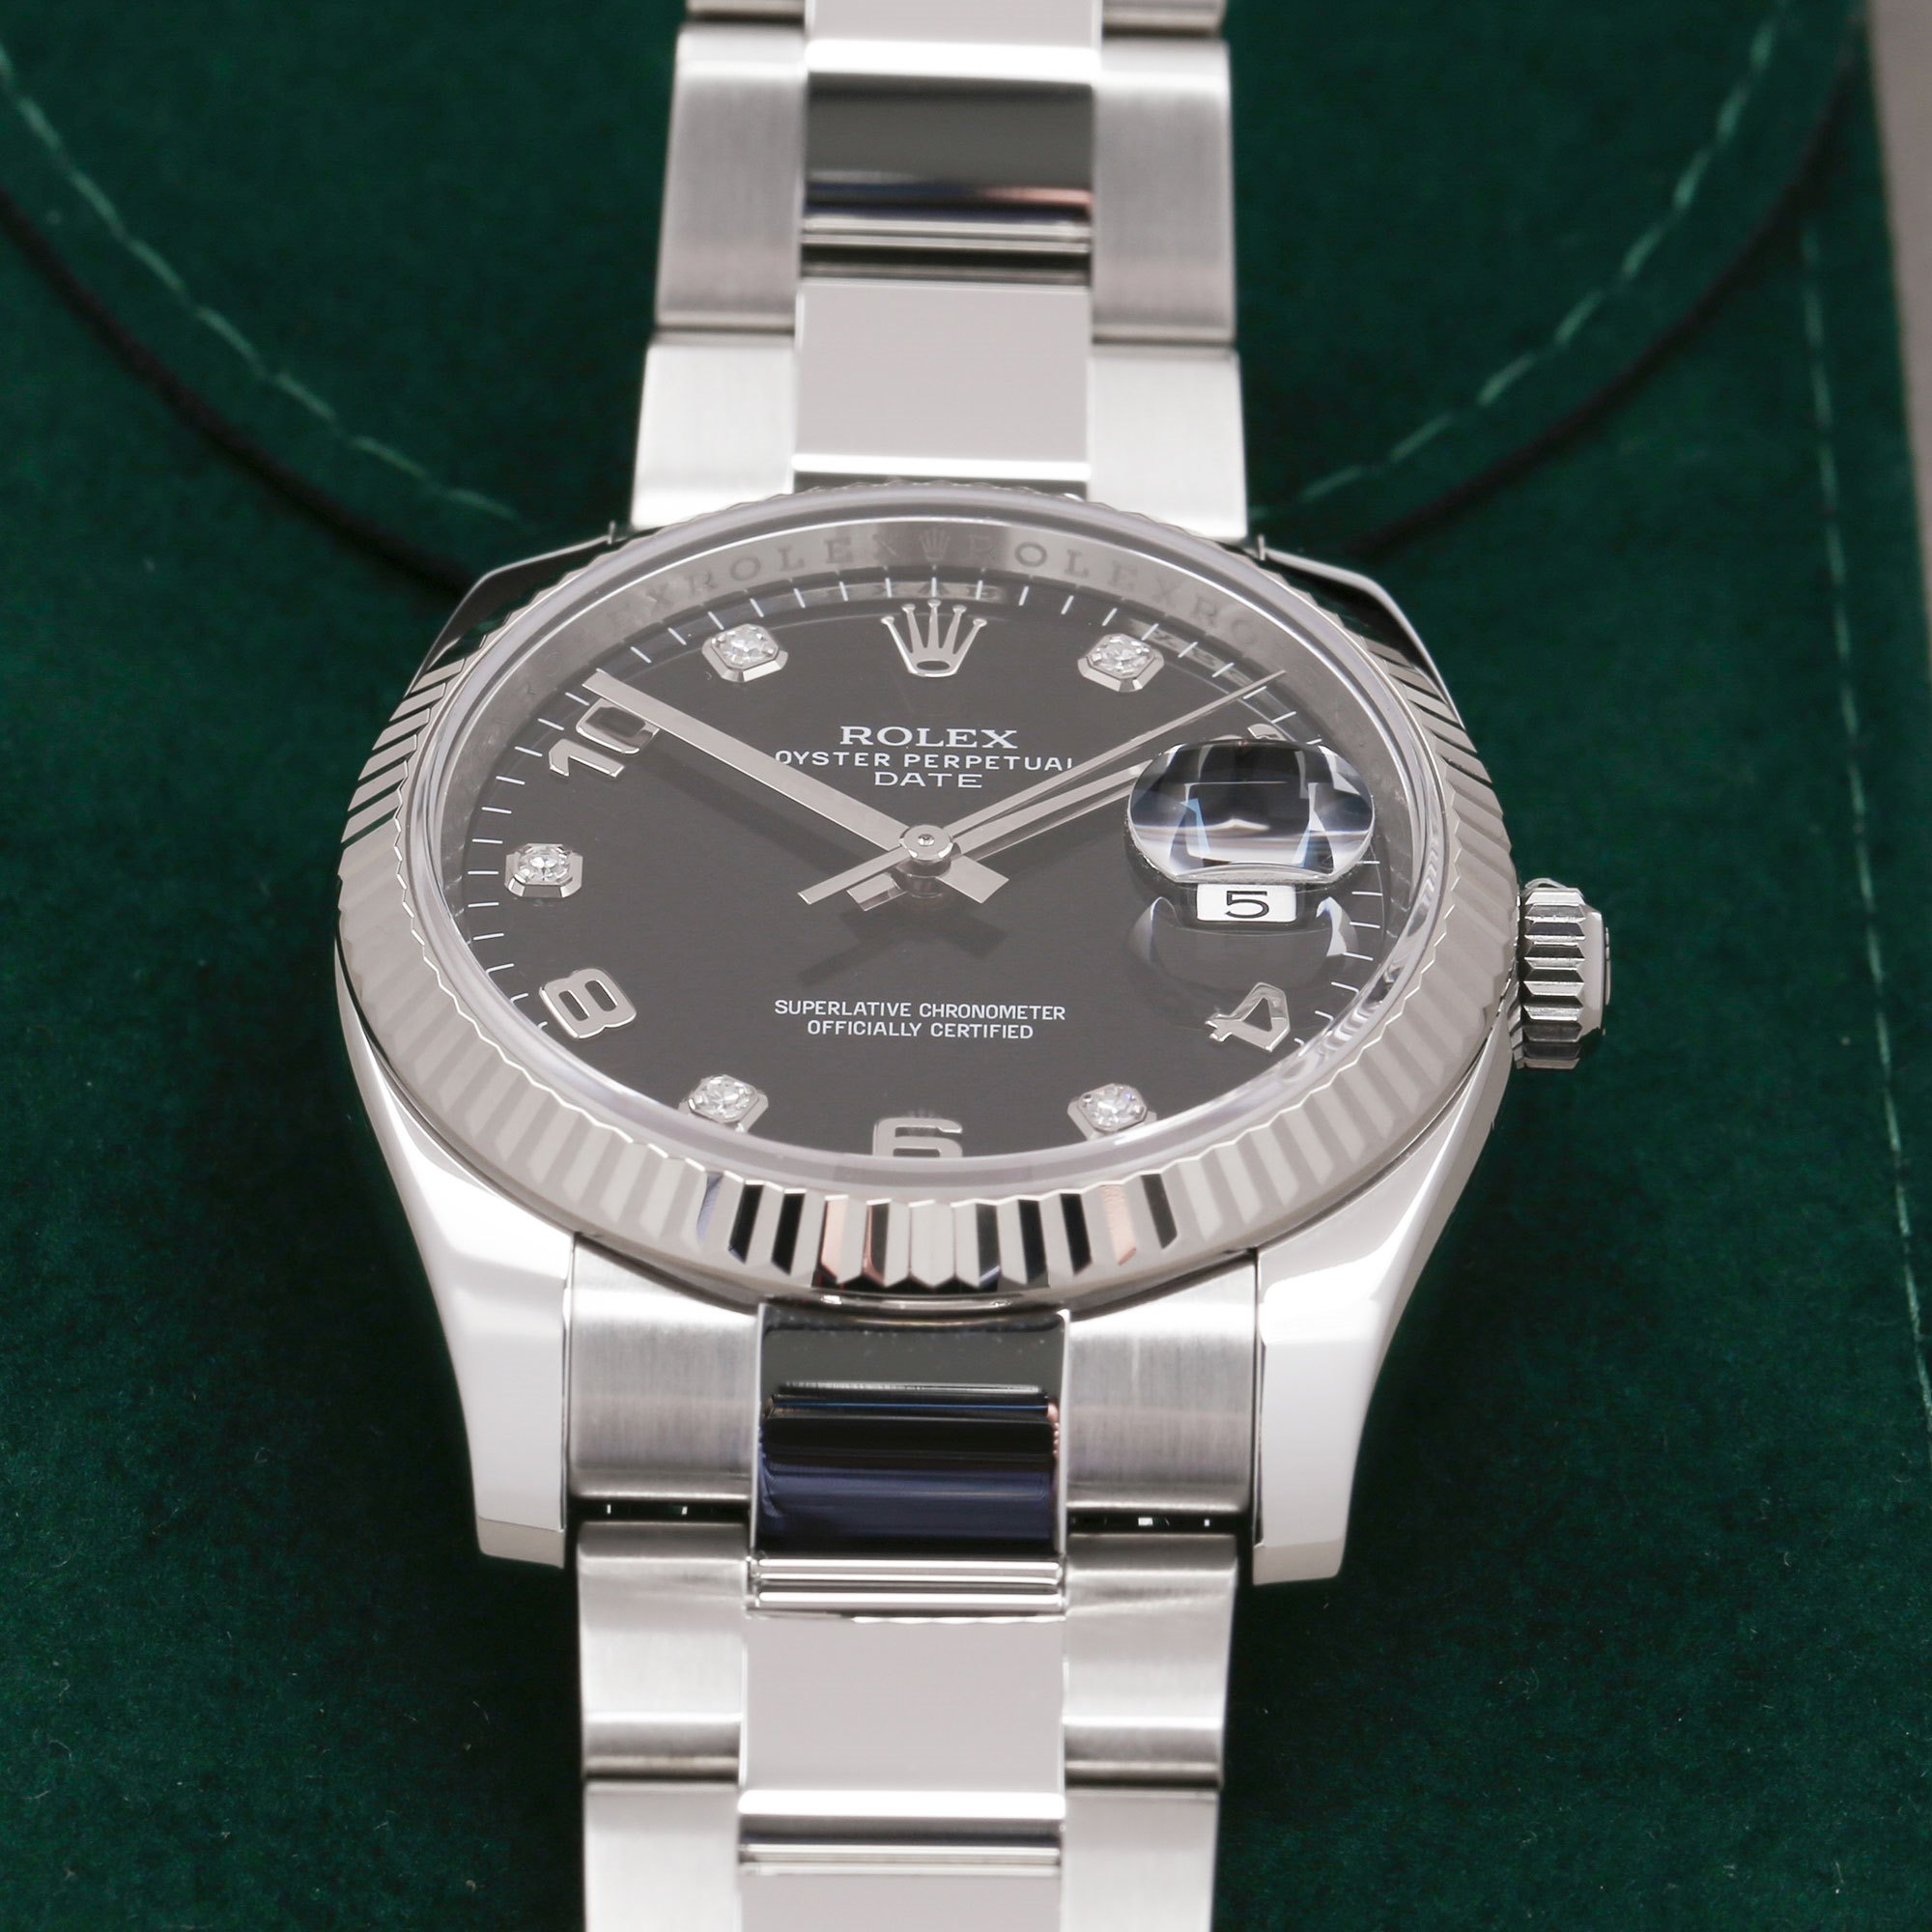 Rolex Oyster Perpetual Date Diamond Dot 18K White Gold & Stainless Steel 115234